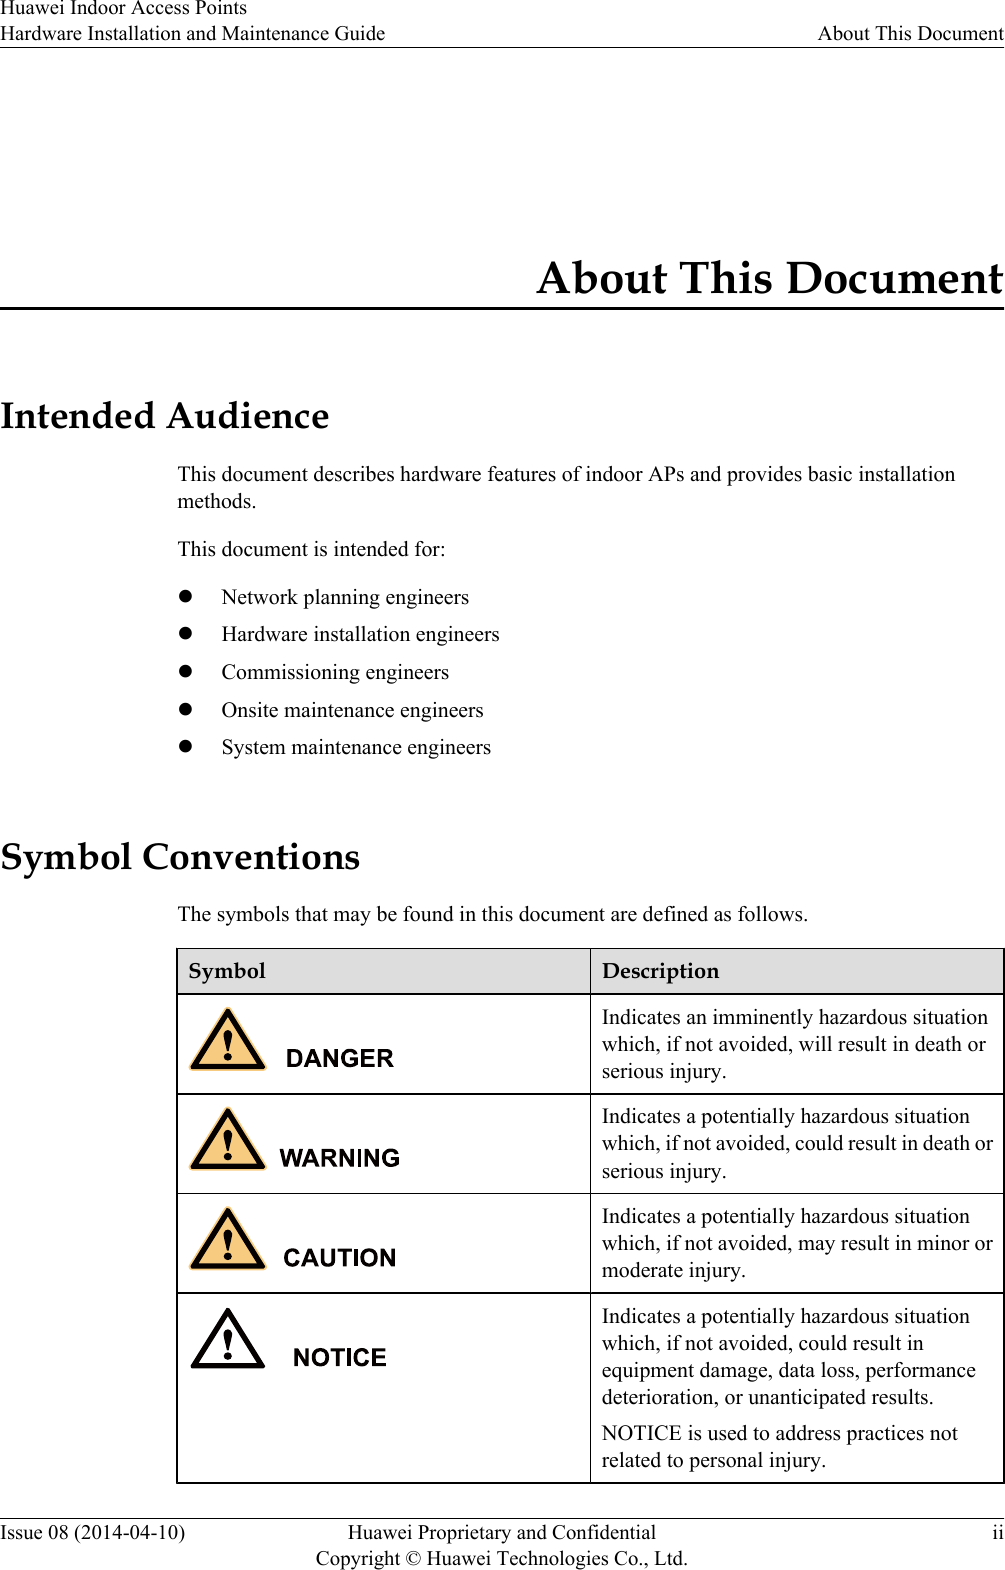 About This DocumentIntended AudienceThis document describes hardware features of indoor APs and provides basic installationmethods.This document is intended for:lNetwork planning engineerslHardware installation engineerslCommissioning engineerslOnsite maintenance engineerslSystem maintenance engineersSymbol ConventionsThe symbols that may be found in this document are defined as follows.Symbol DescriptionIndicates an imminently hazardous situationwhich, if not avoided, will result in death orserious injury.Indicates a potentially hazardous situationwhich, if not avoided, could result in death orserious injury.Indicates a potentially hazardous situationwhich, if not avoided, may result in minor ormoderate injury.Indicates a potentially hazardous situationwhich, if not avoided, could result inequipment damage, data loss, performancedeterioration, or unanticipated results.NOTICE is used to address practices notrelated to personal injury.Huawei Indoor Access PointsHardware Installation and Maintenance Guide About This DocumentIssue 08 (2014-04-10) Huawei Proprietary and ConfidentialCopyright © Huawei Technologies Co., Ltd.ii